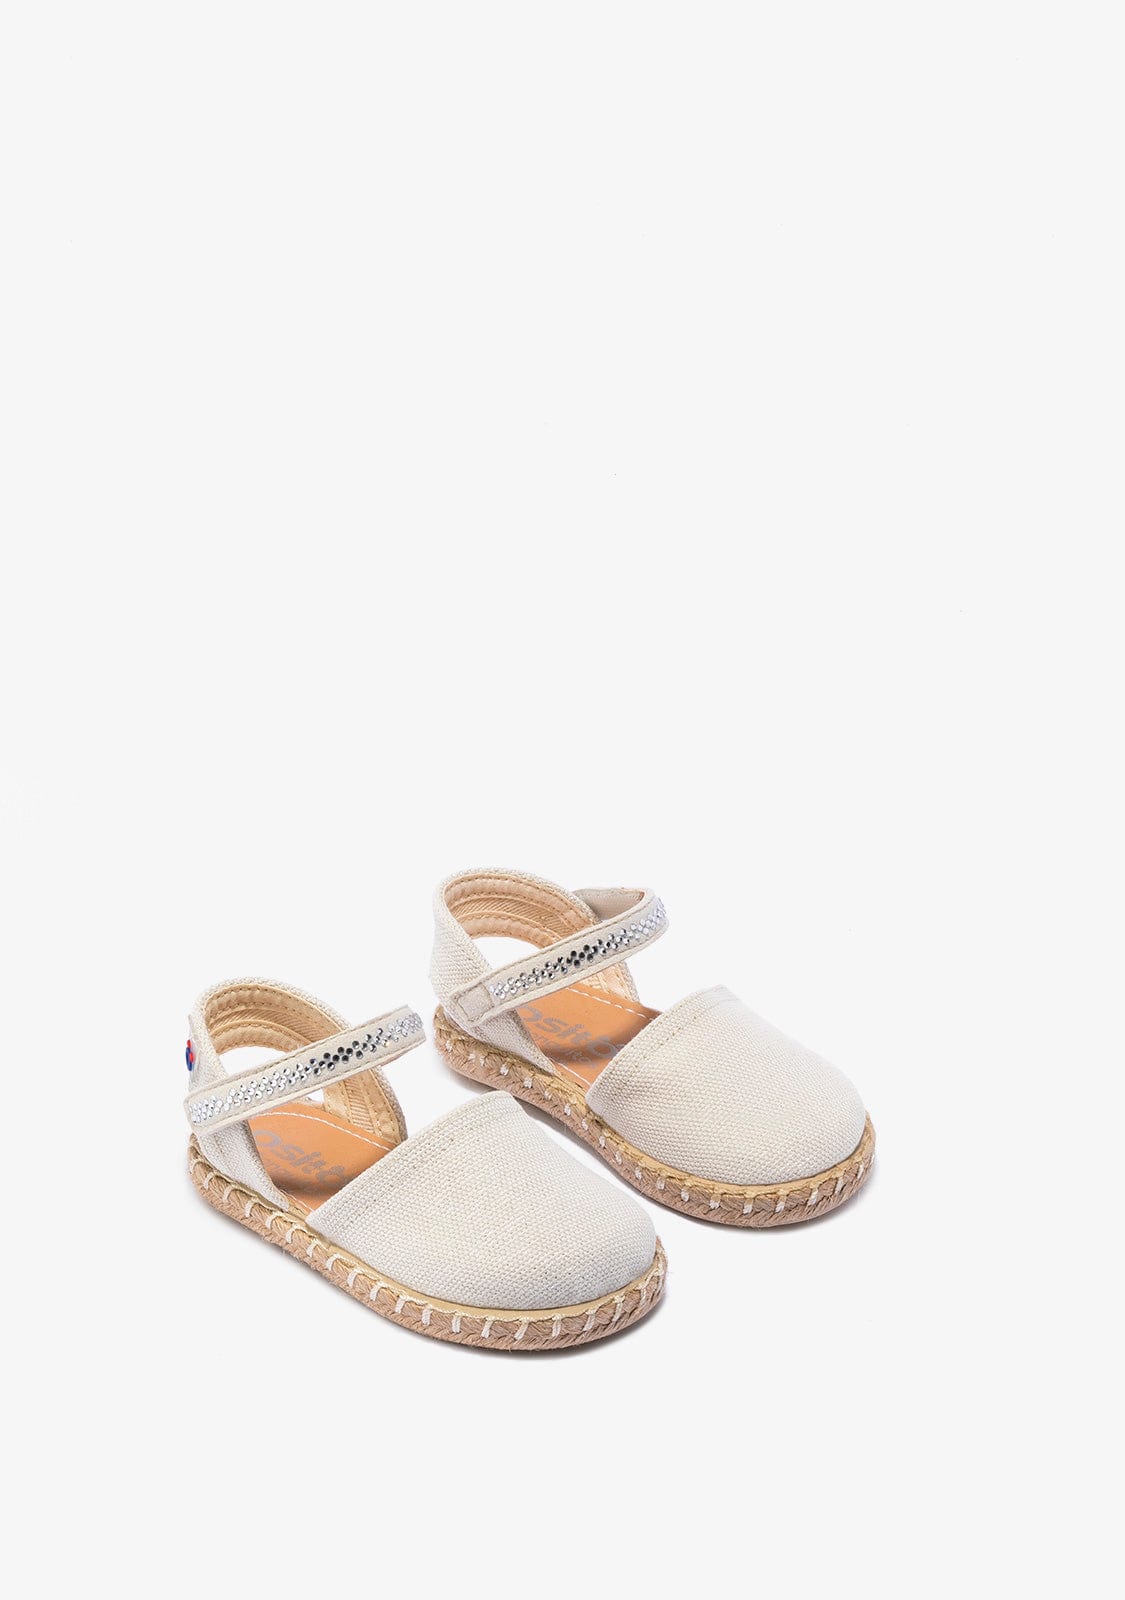 OSITO Shoes Baby's Beige Adherent Strip Espadrilles